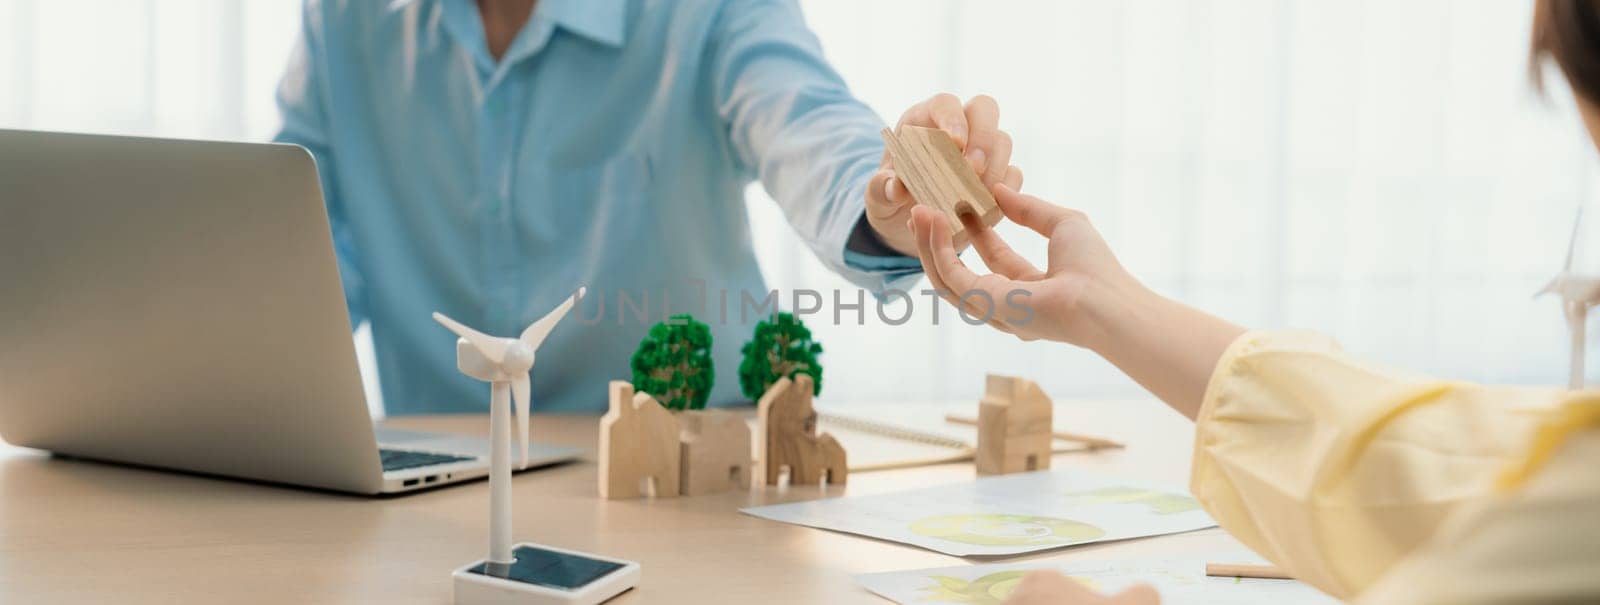 Two business people talking about eco city at green business meeting on meeting table with windmill represented renewable energy, wooden house block and tree model represent green city. Delineation.